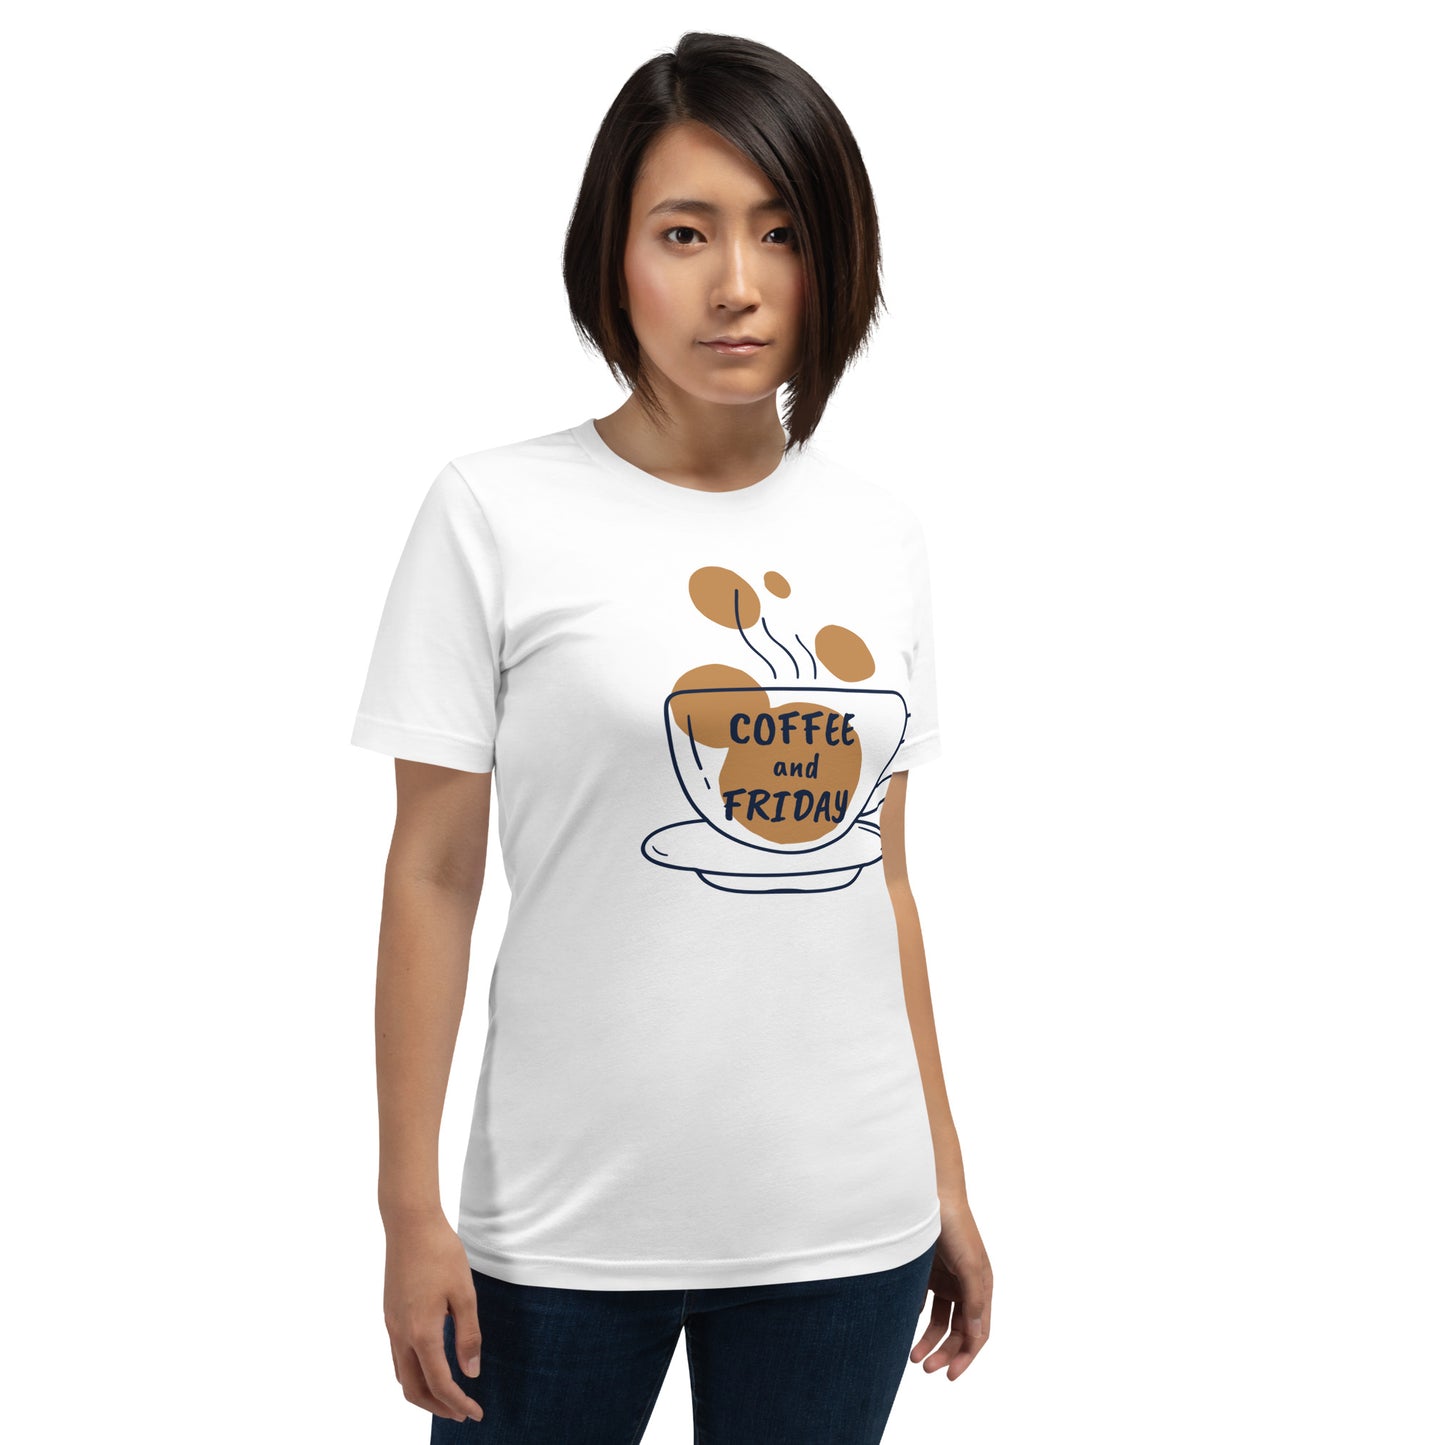 Coffee and Friends Short-Sleeve T-Shirt